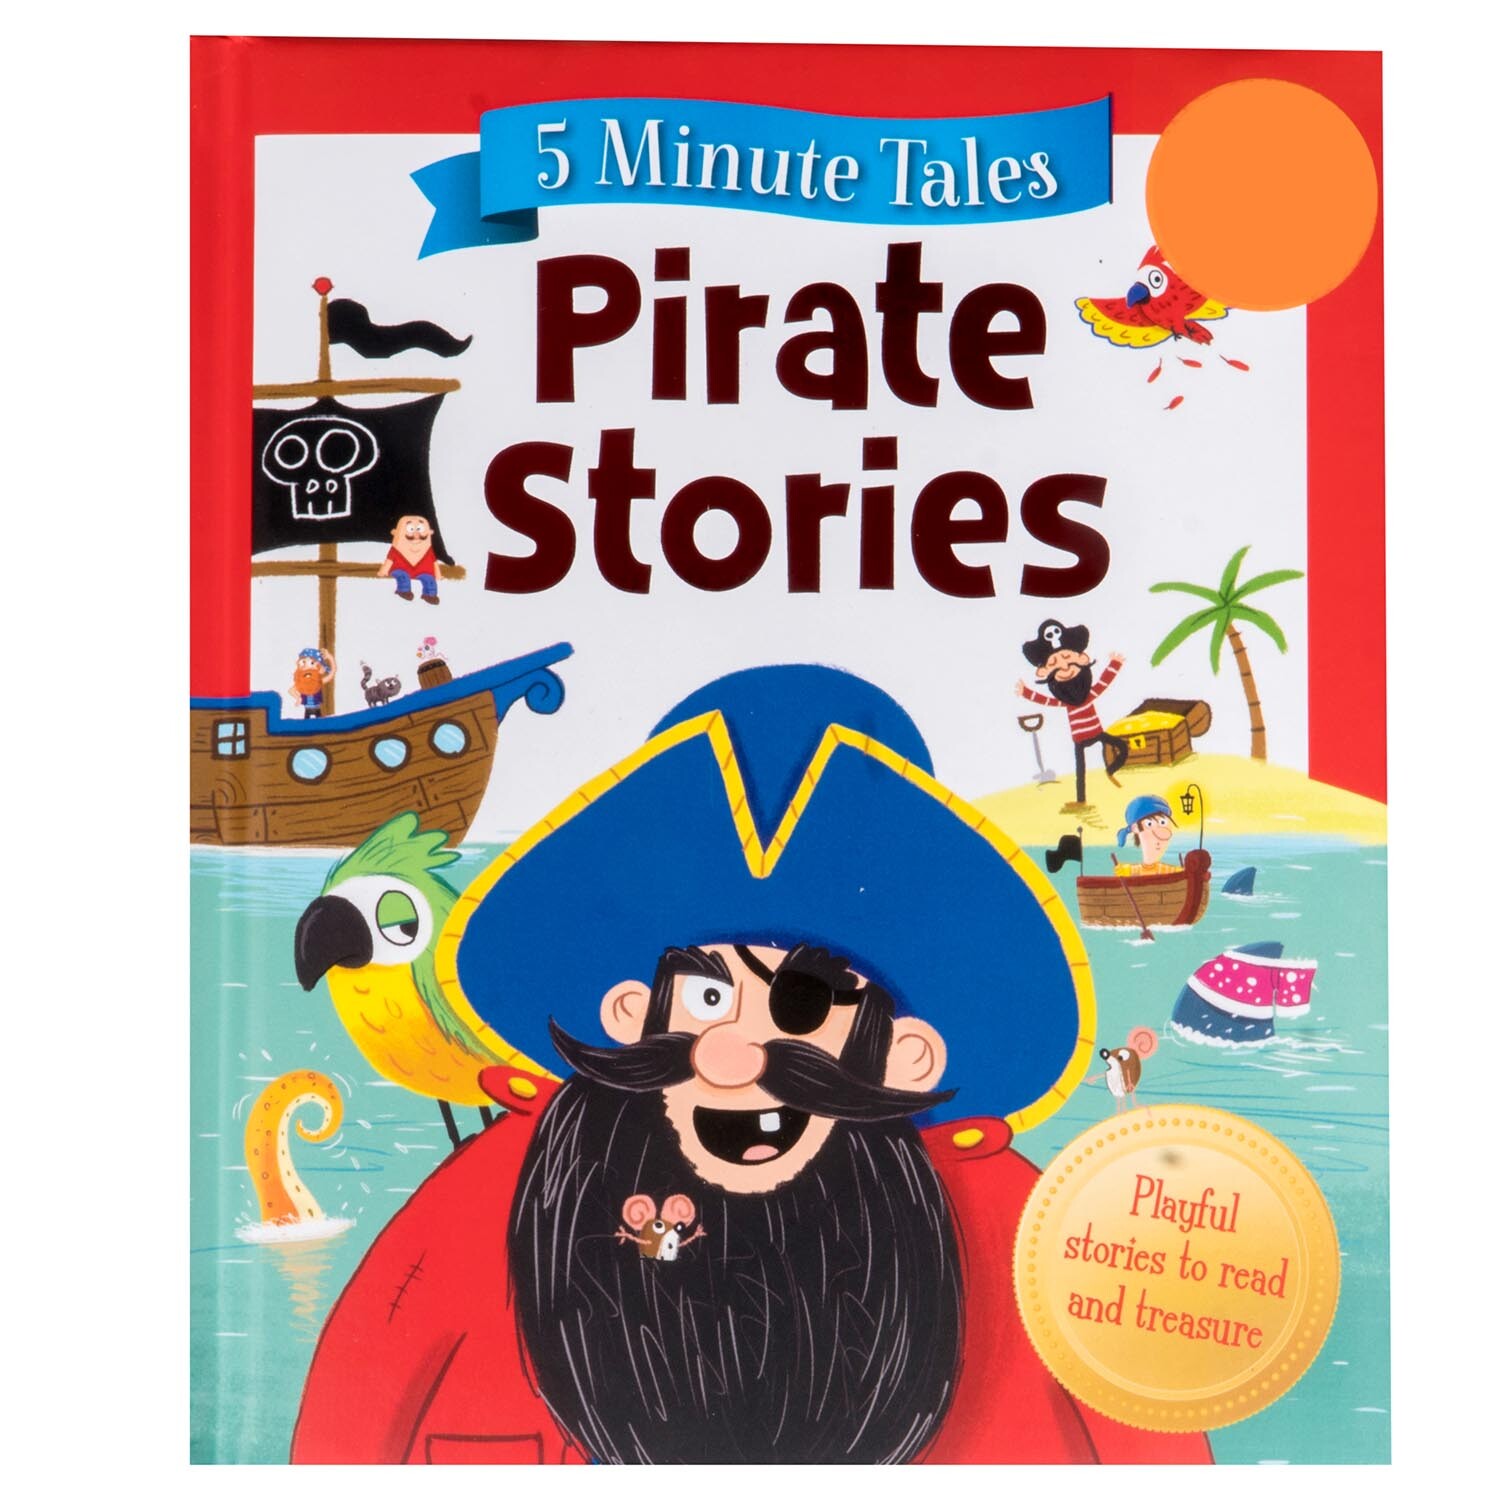 5 Minute Tales Pirate Stories Image